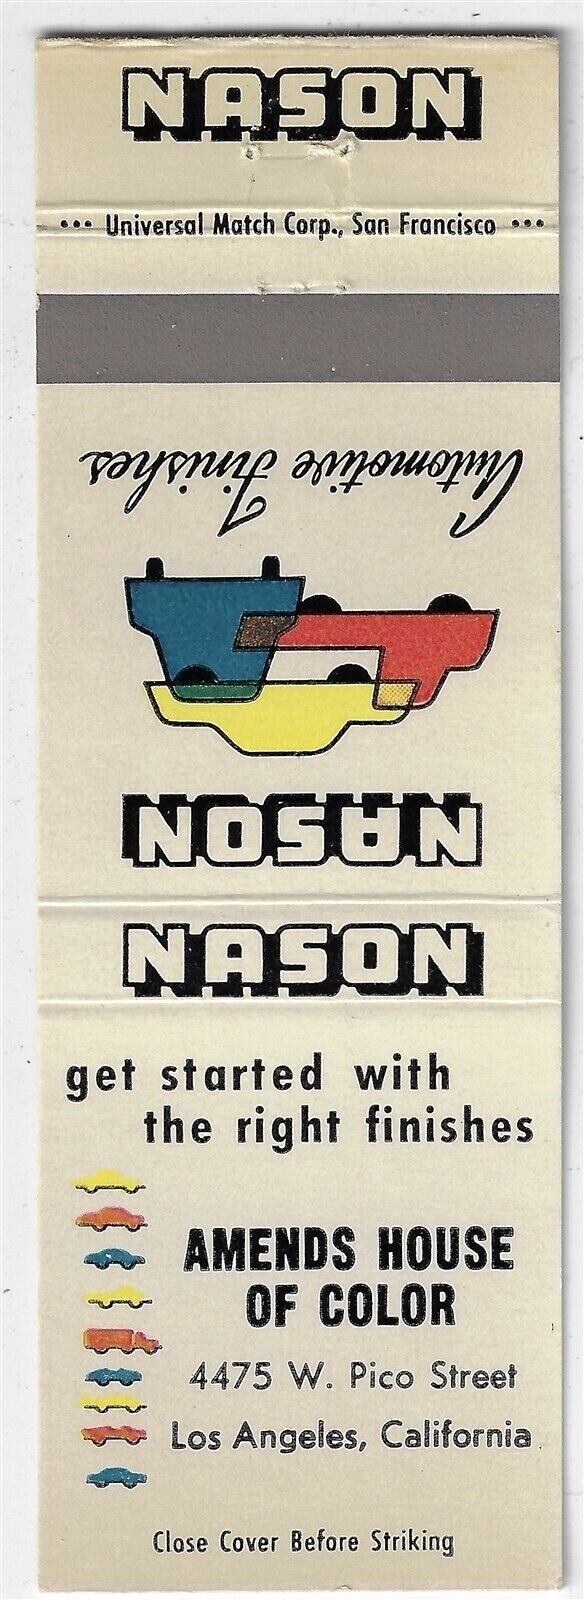 Empty 20S Matchbook Cover Nason Amends House of Color Los Angeles California 